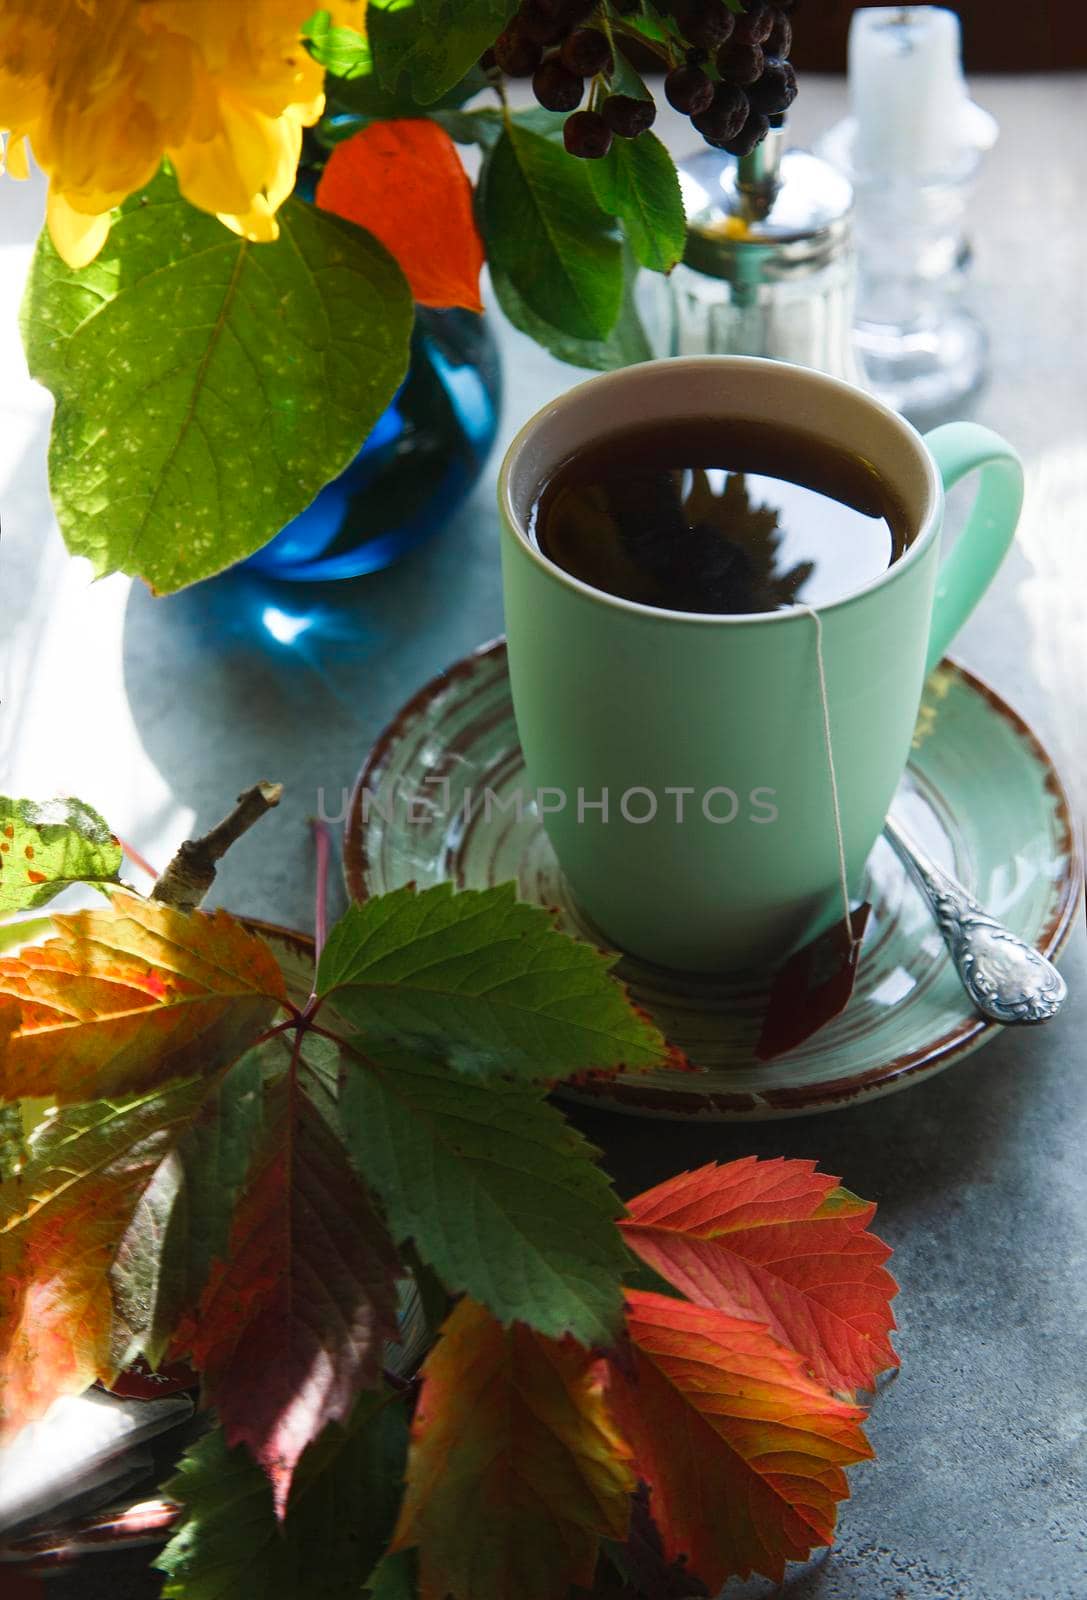 Green cup of tea on green plate with autumncolored leaves and flowers, early autumn morning concept, still life, selective focus.